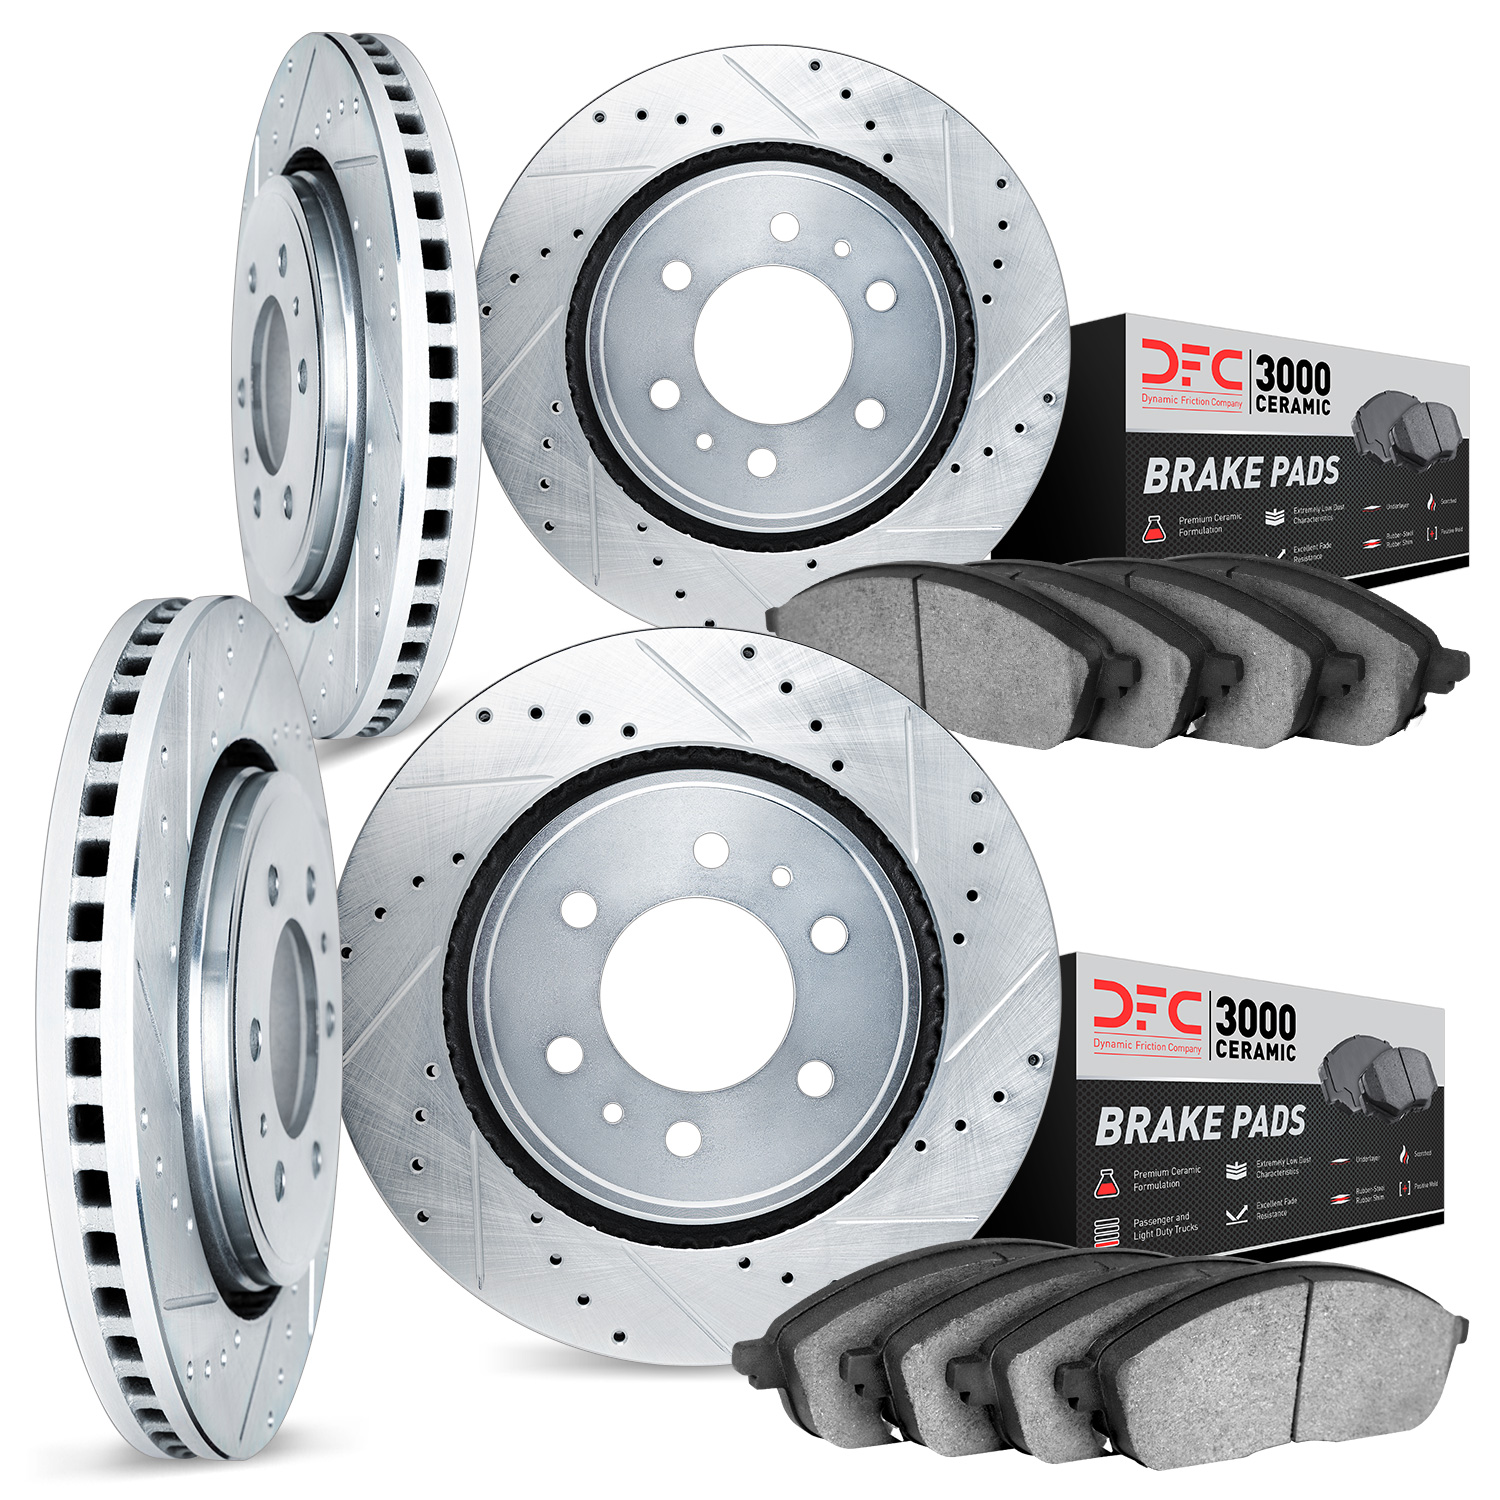 7304-76067 Drilled/Slotted Brake Rotor with 3000-Series Ceramic Brake Pads Kit [Silver], 2003-2009 Lexus/Toyota/Scion, Position: